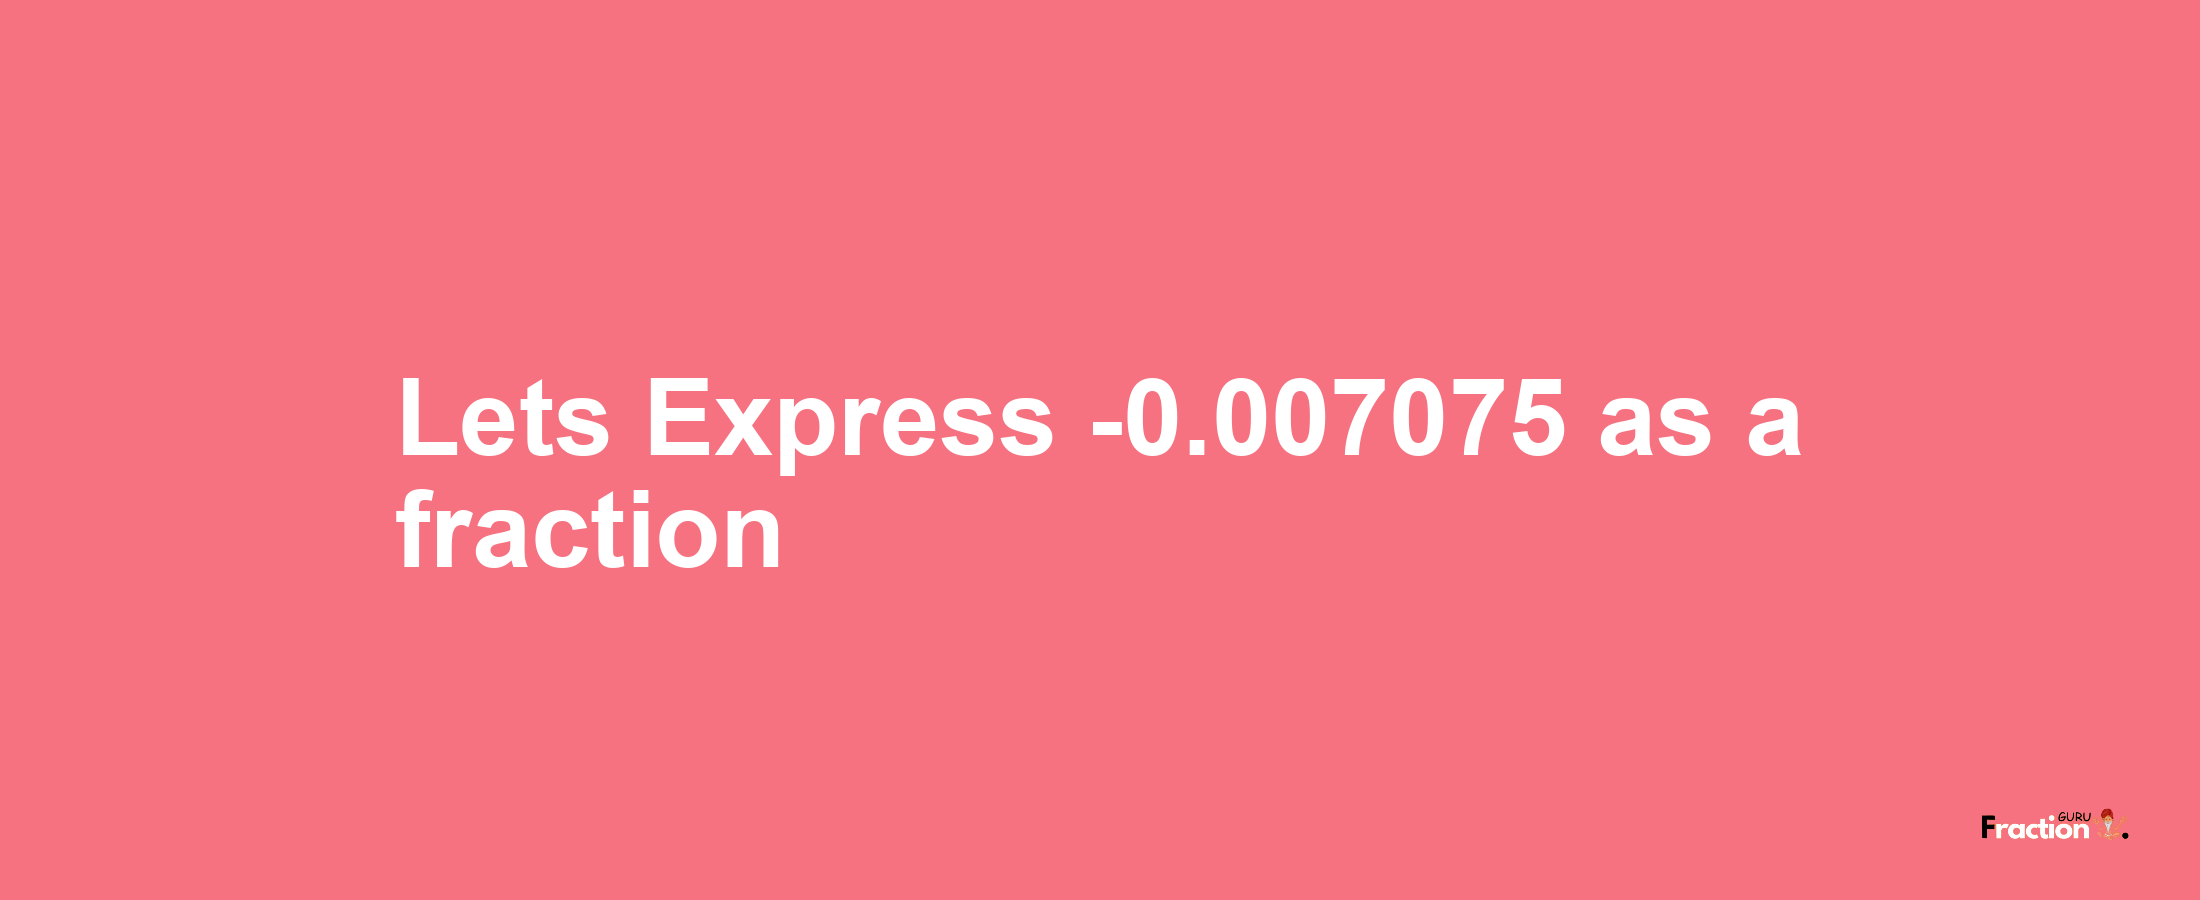 Lets Express -0.007075 as afraction